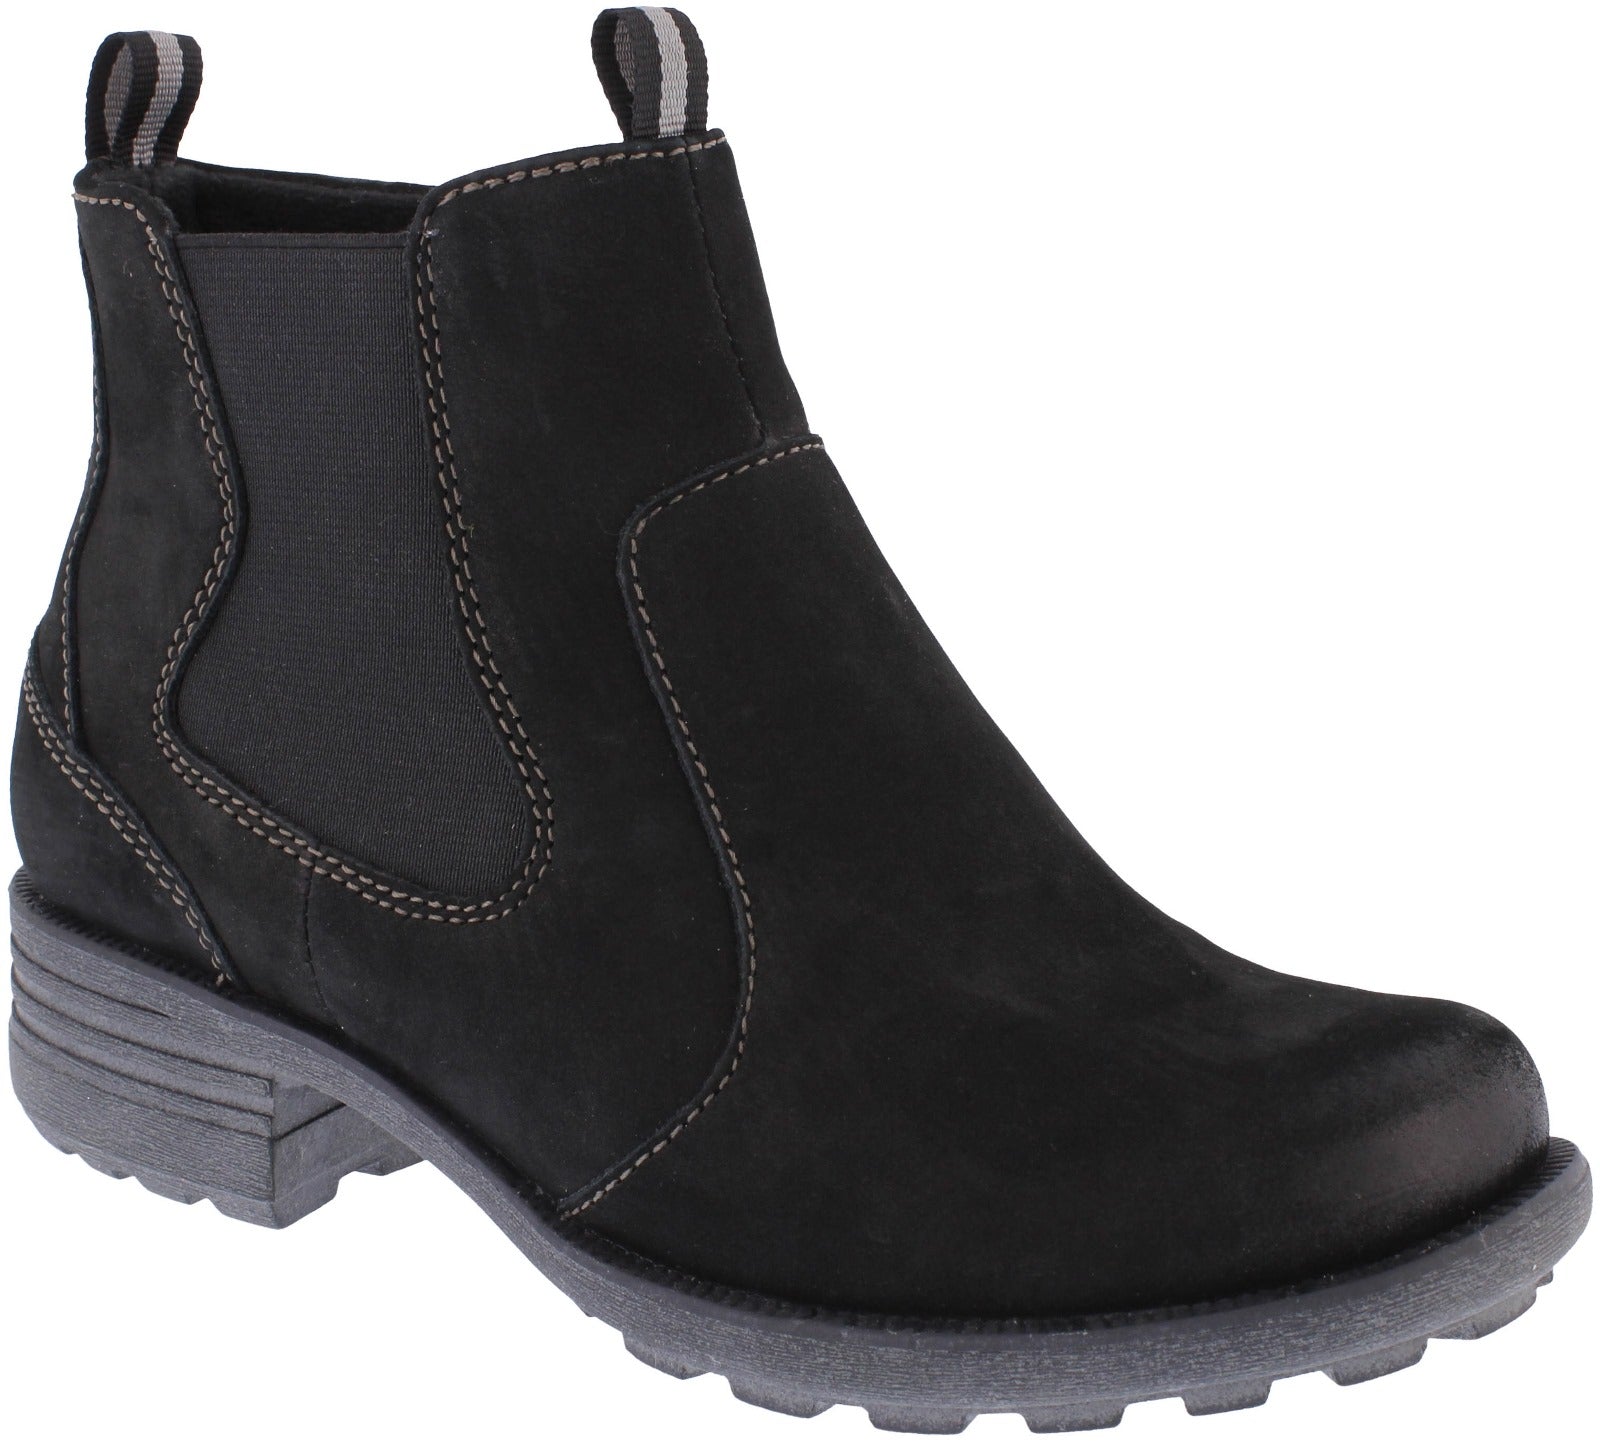 Free Spirit 40814 Ascot Ladies Black Leather Arch Support Side Zip Ankle Boots